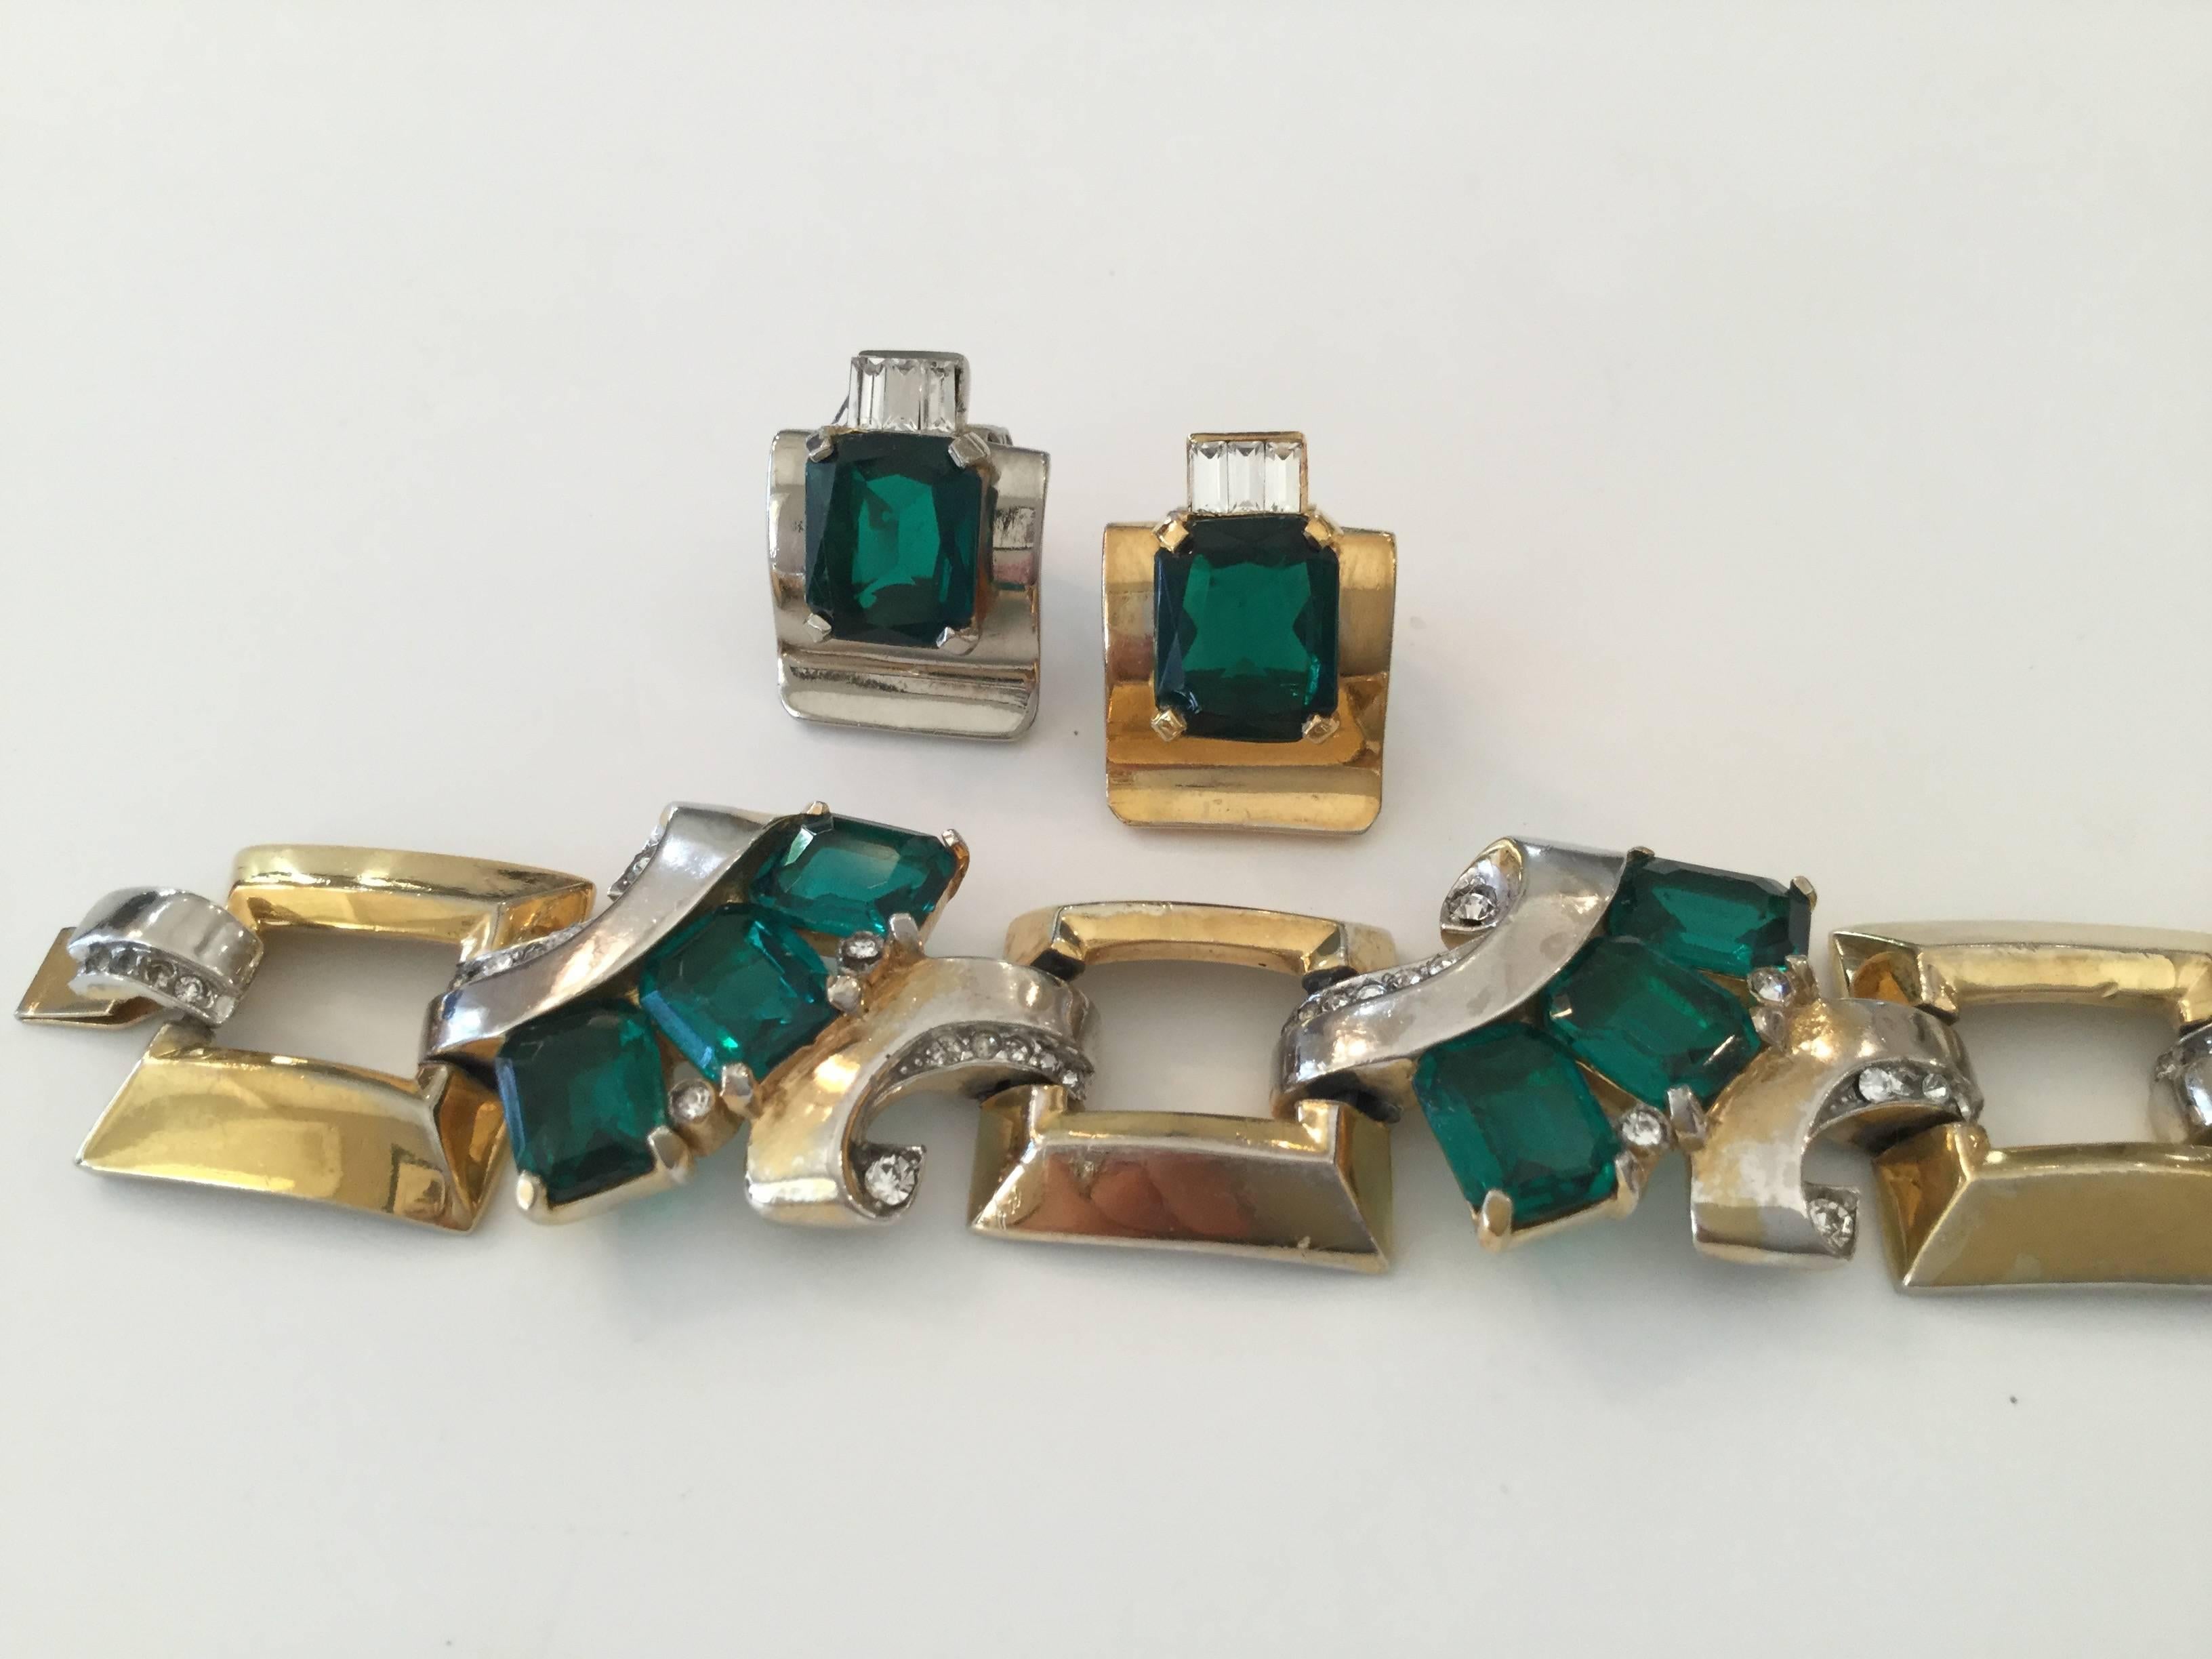 Brown Art Deco Mazer Bracelet and Earring Set. Late 1930's.